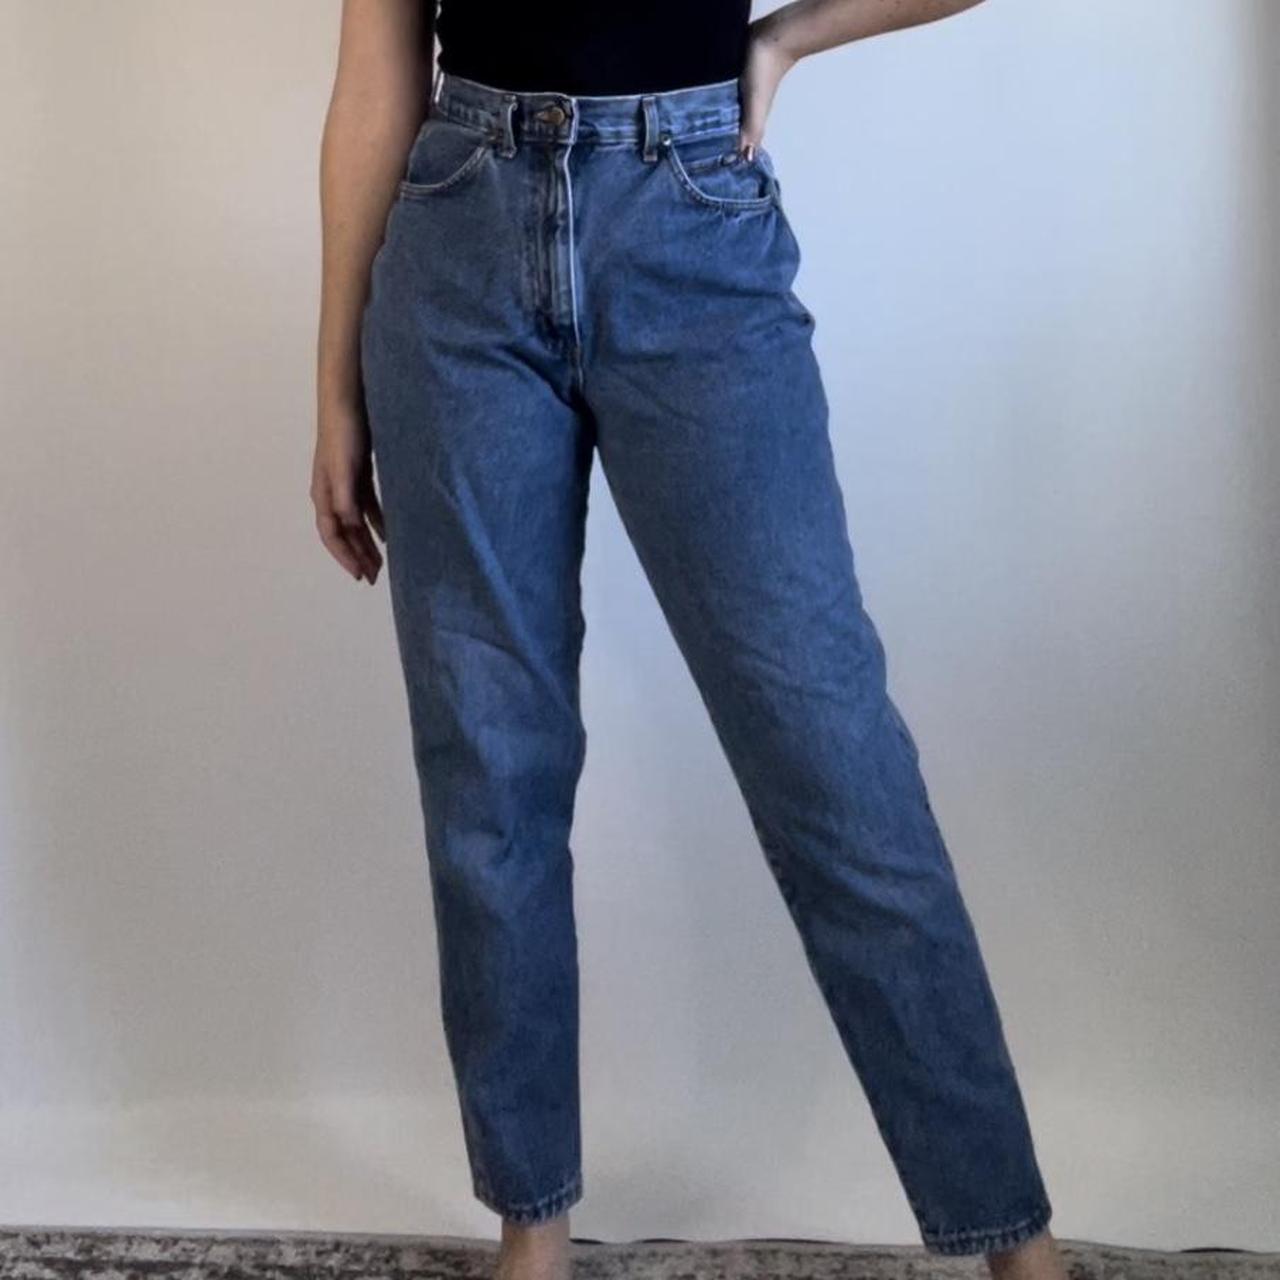 Chic Women's Blue and Navy Jeans